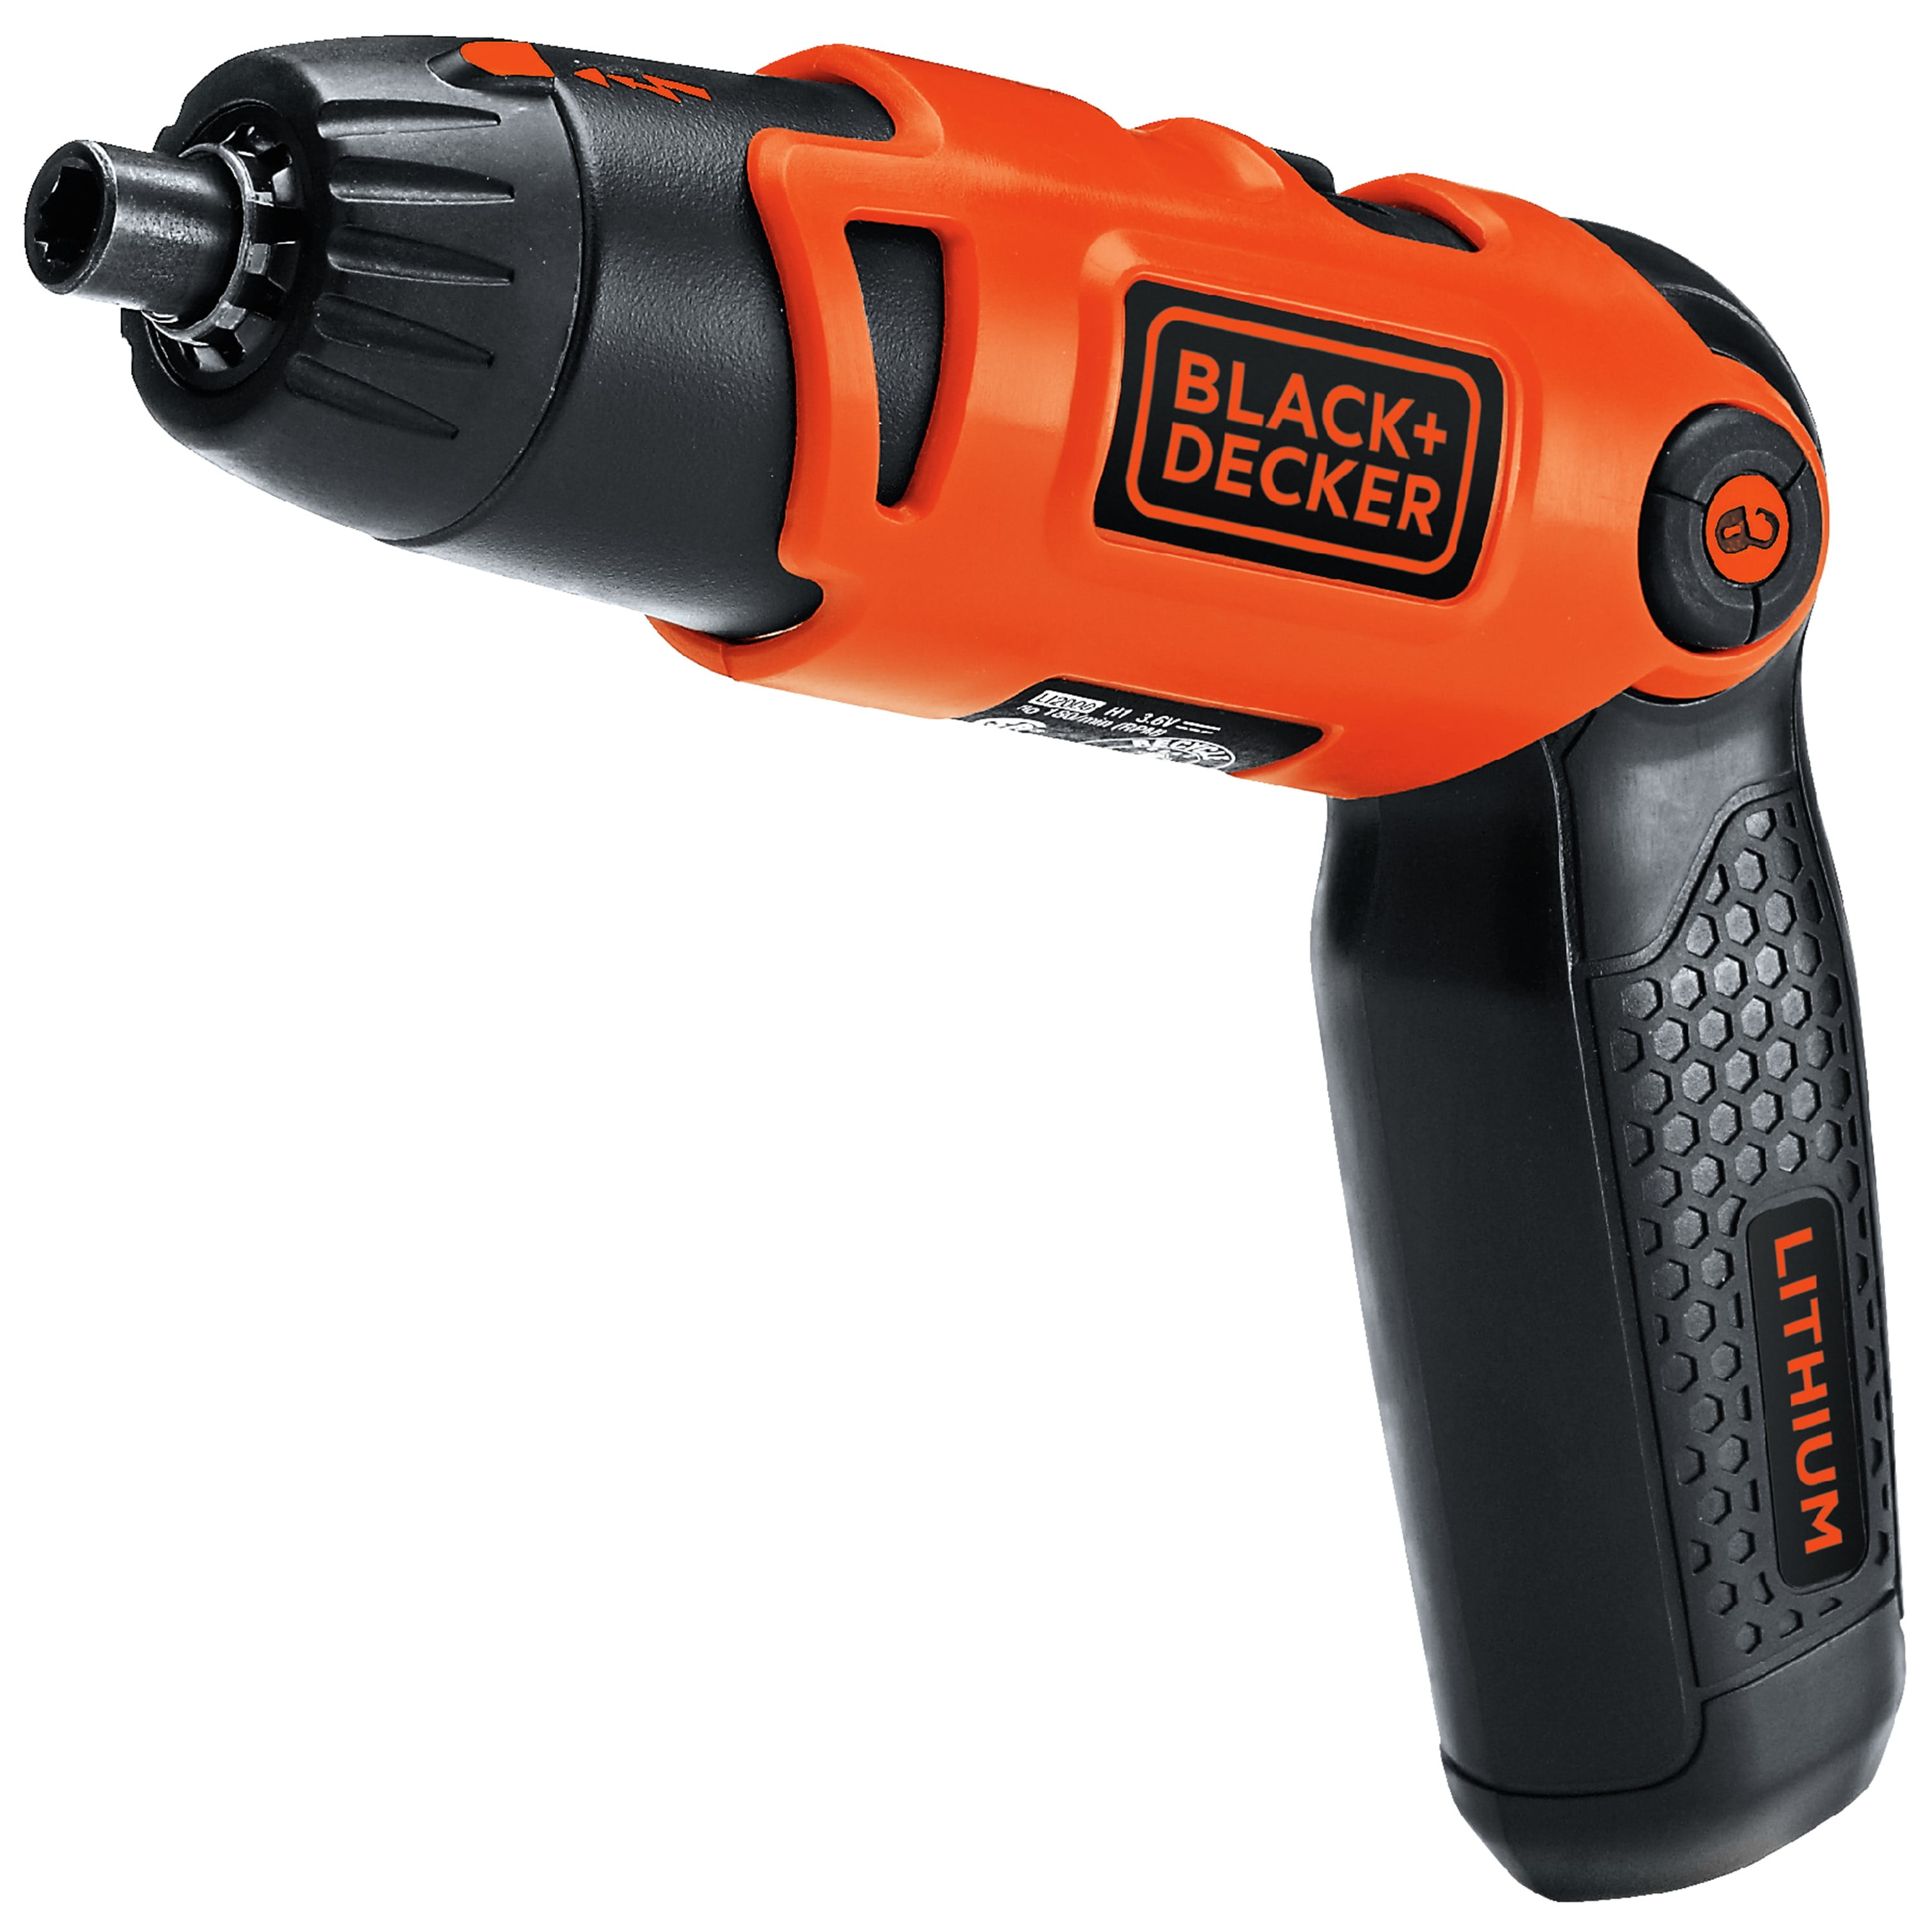 BLACK & DECKER 3.6-Volt 3/8-in Cordless Screwdriver (1-Battery Included and  Charger Included) at